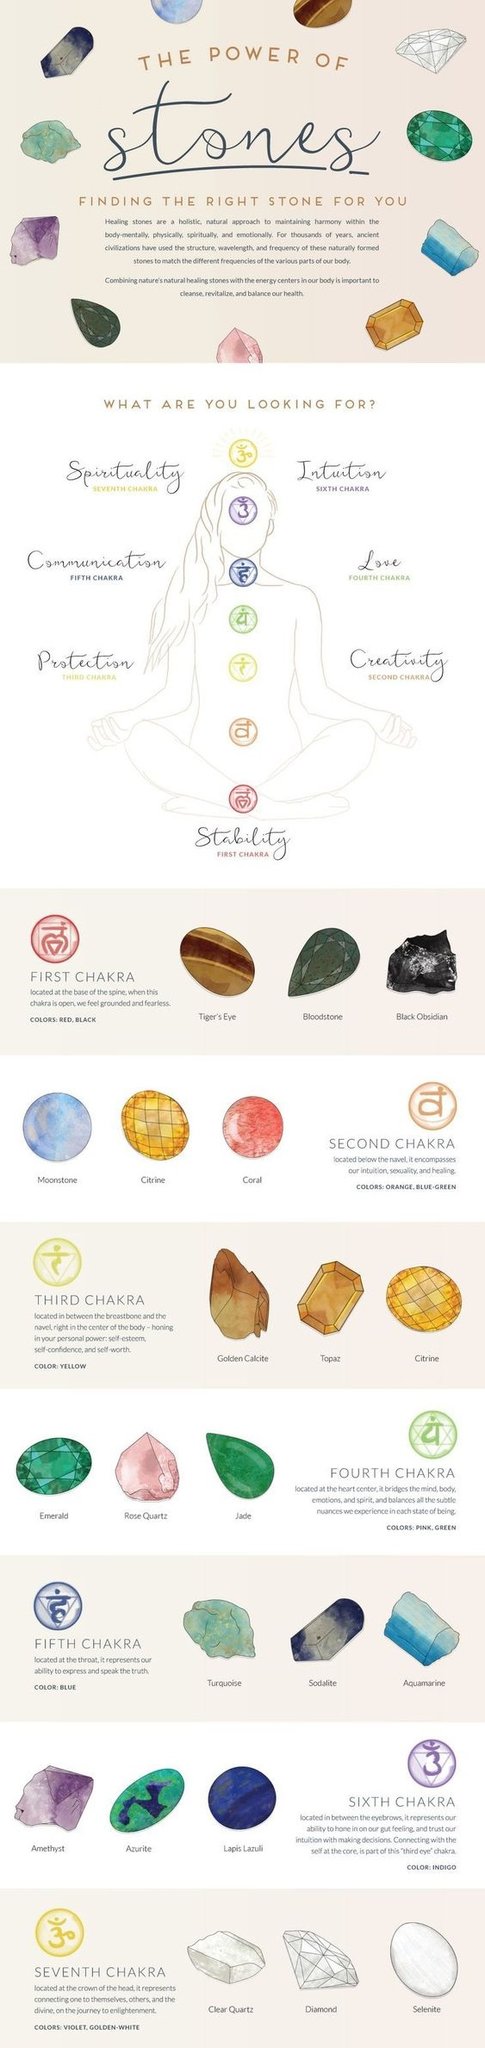 Stones for the 7 Chakras